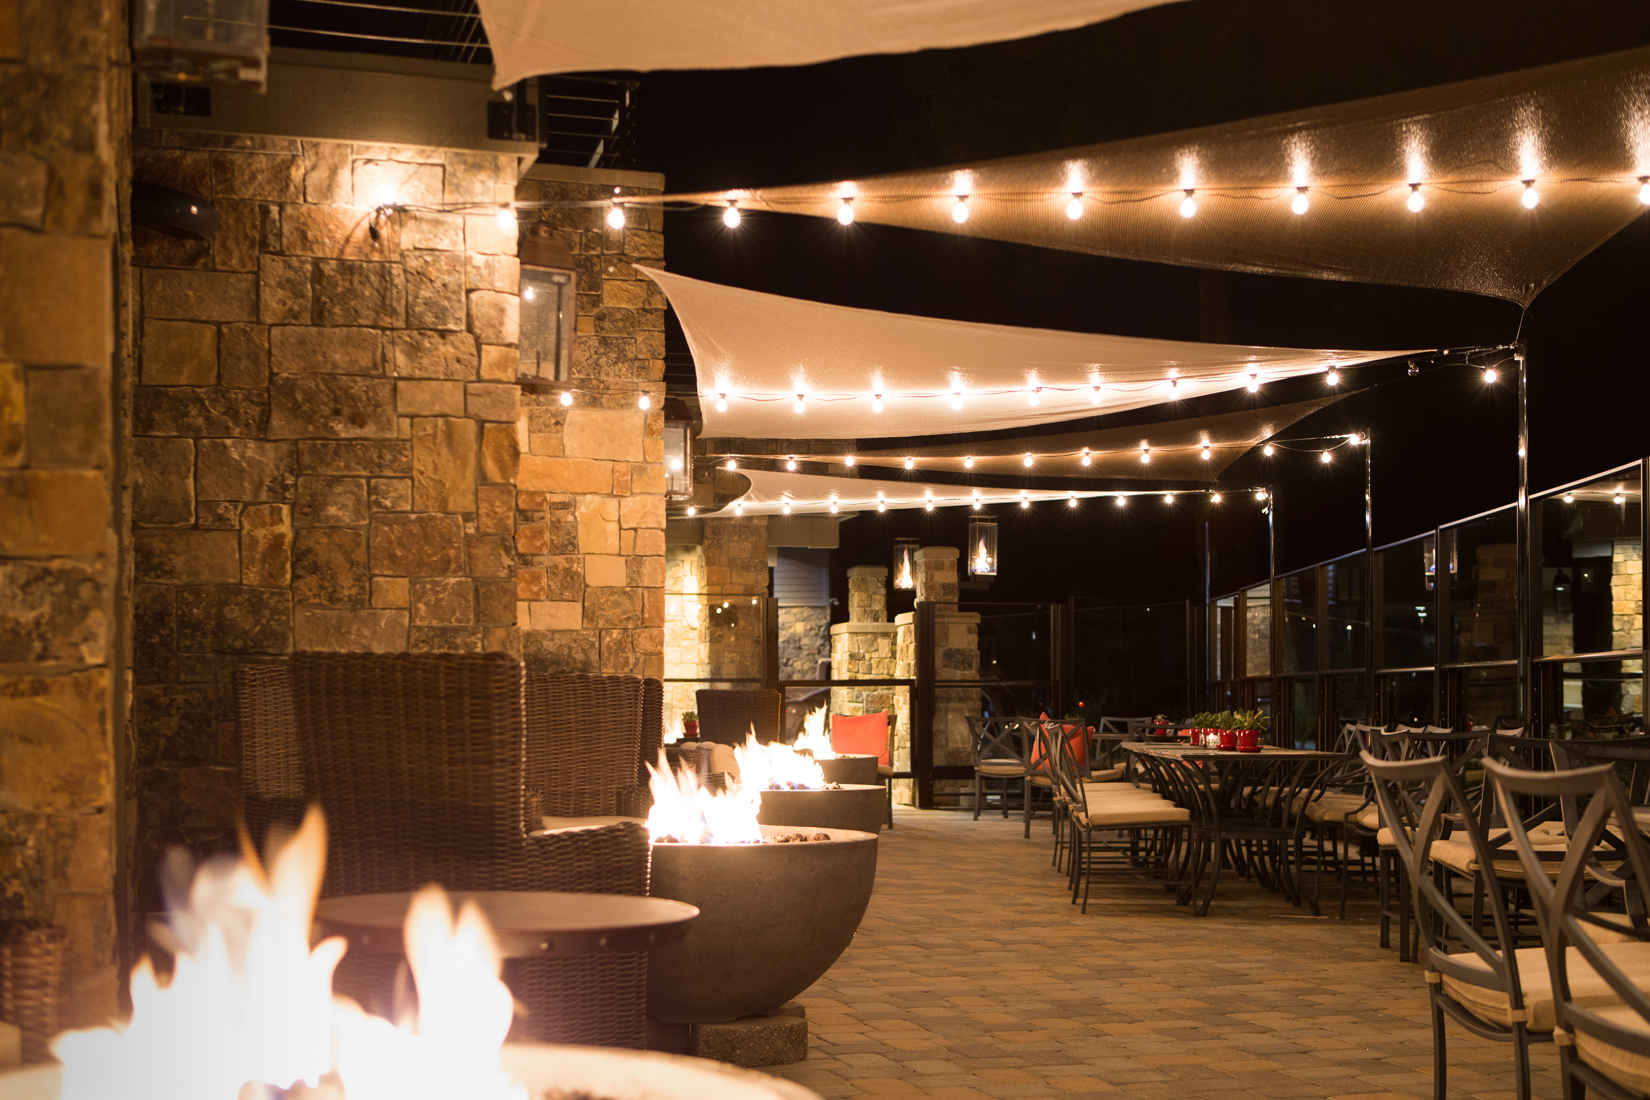 Tahoe Quarterly editors lauded Jimmy’s at The Landing’s outdoor lakeside deck with fire pits and comfy furnishings as a perfect place to sip the luxury hotel’s signature Greek mojito.